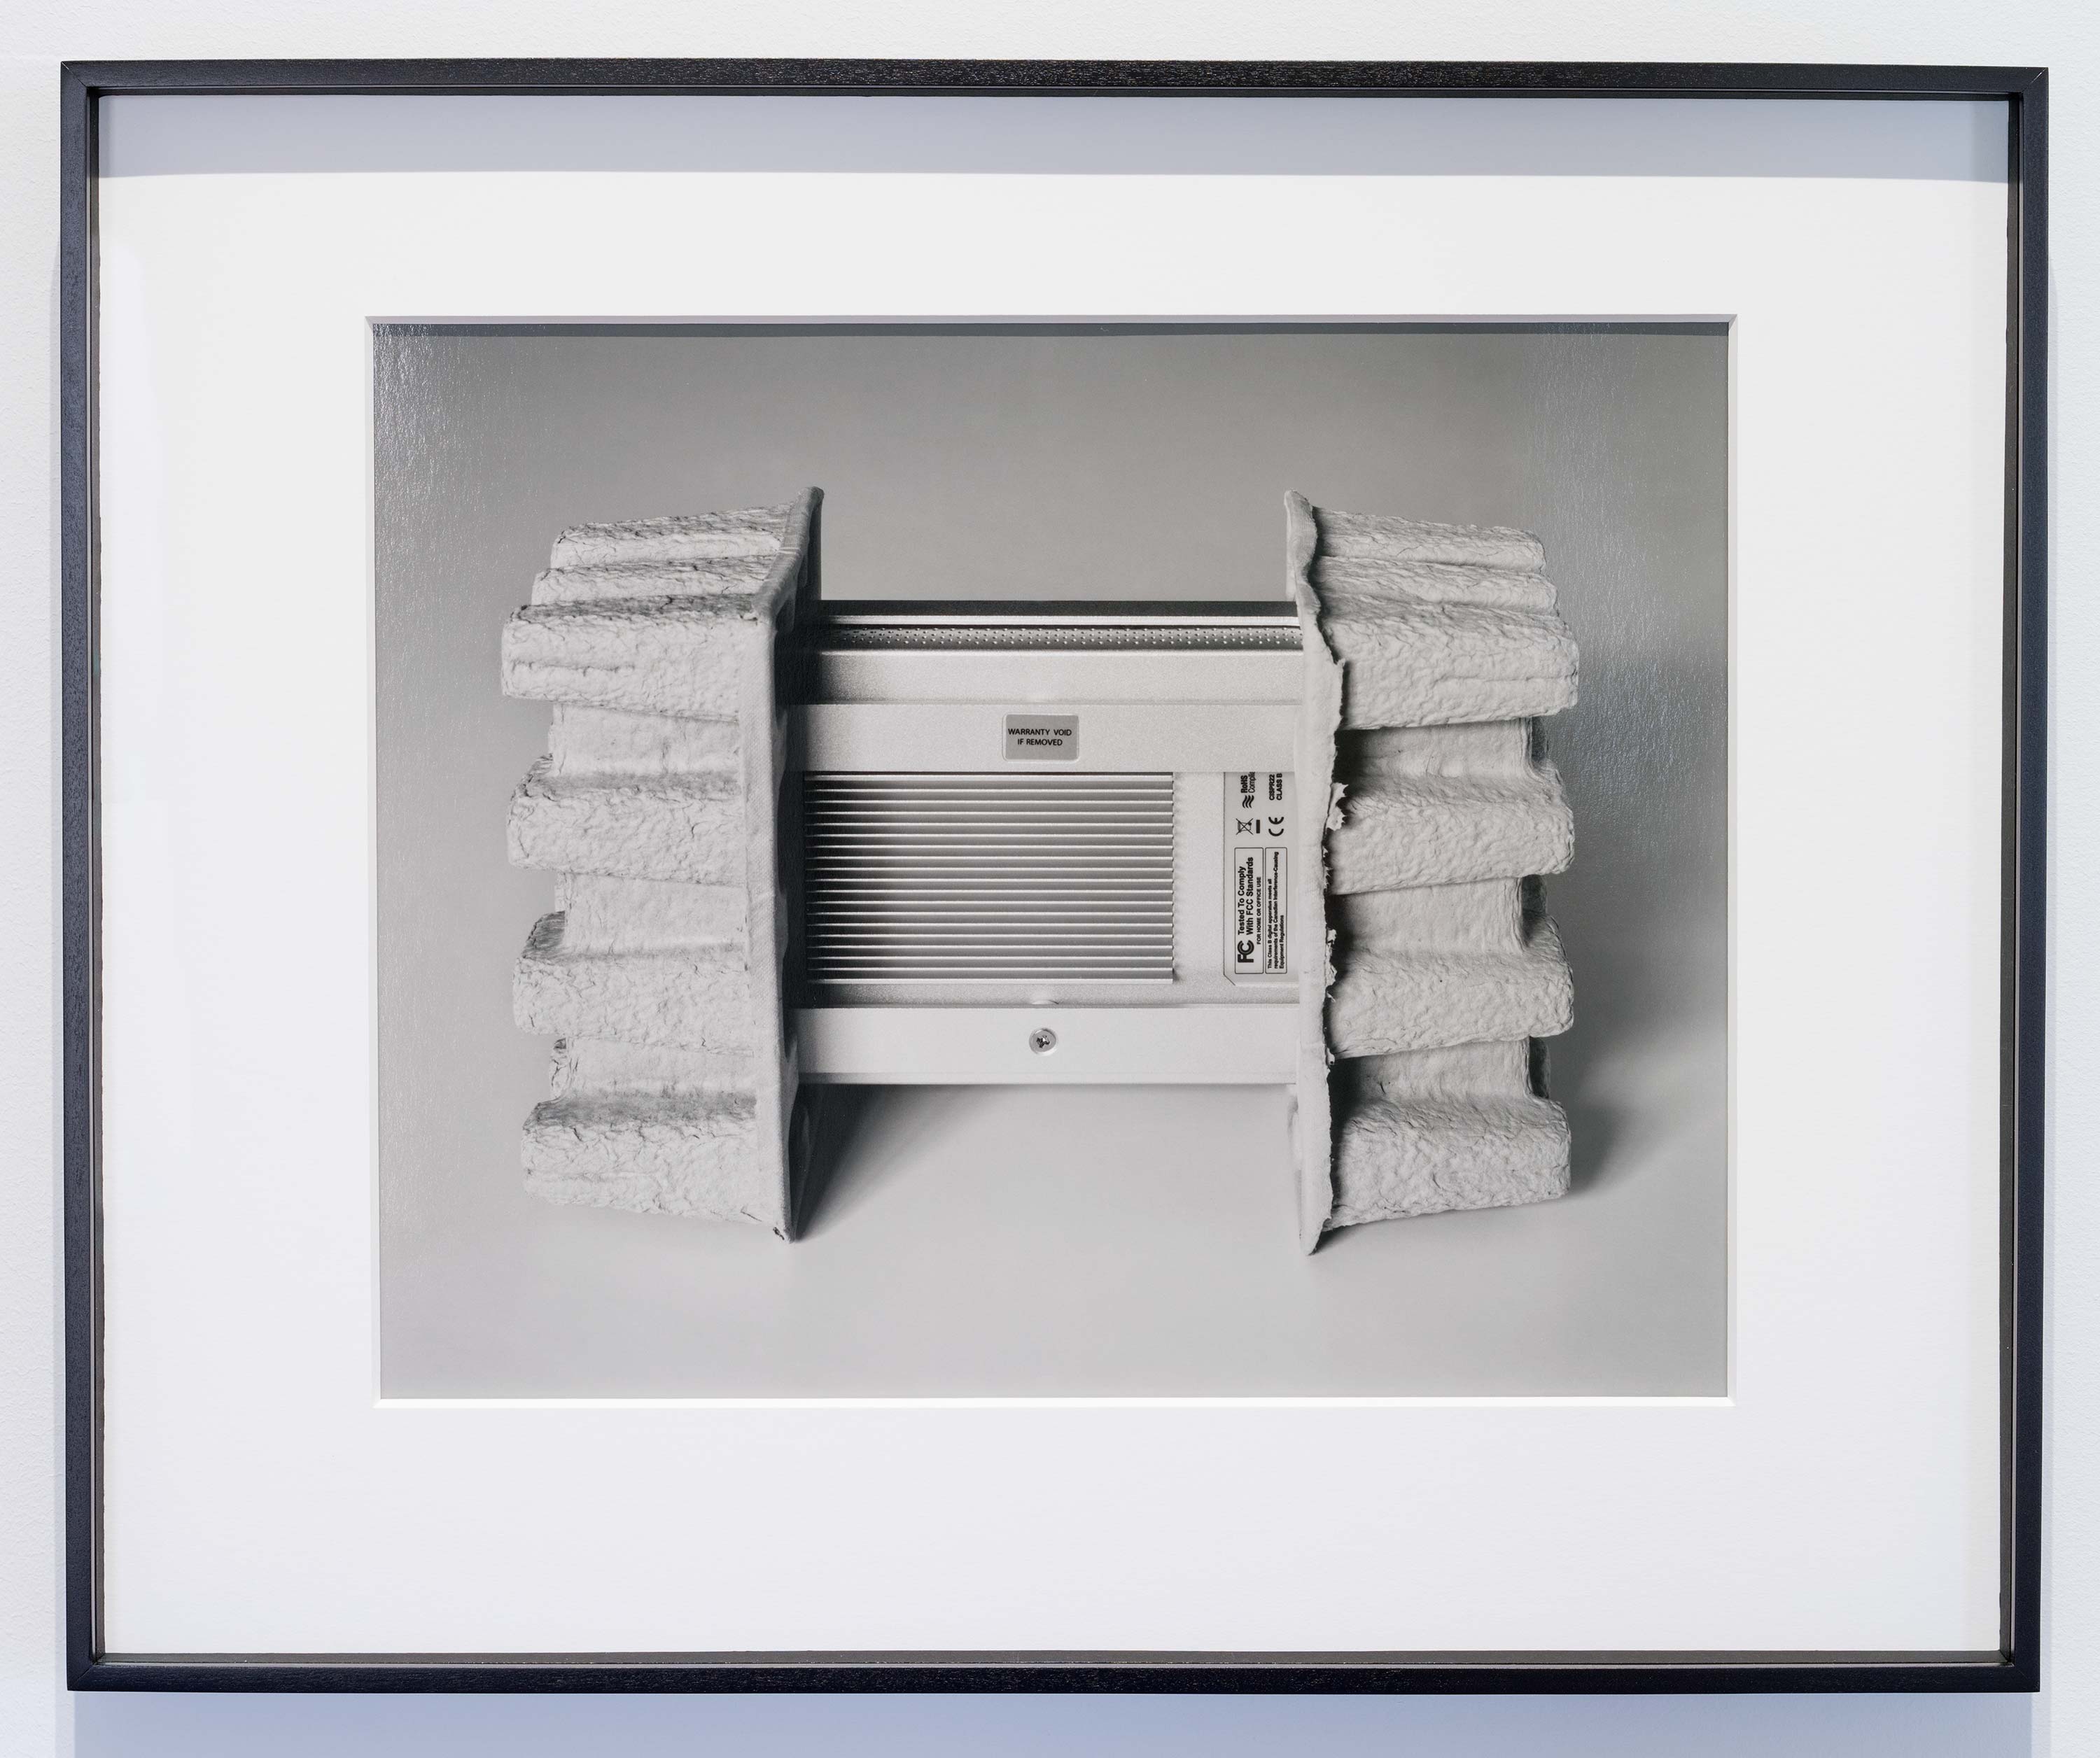 Peter Holzhauer<br>G-Drive<br>2015<br>Silver Gelatin Print<br>17.5 x 21 inches (44.5 x 53 cm)